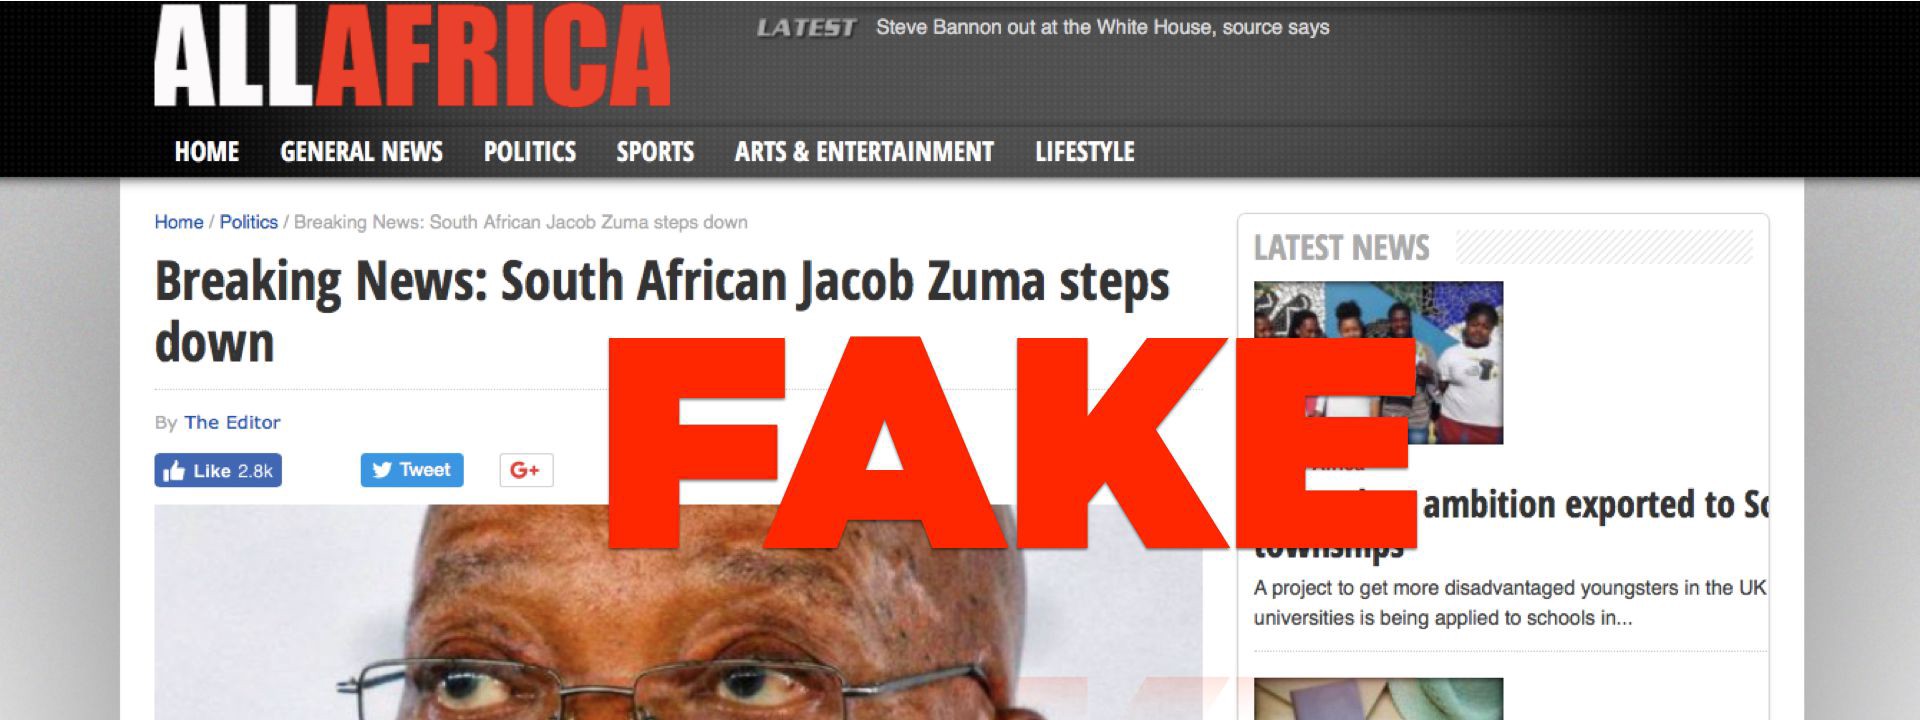 South Africa: Fake News, Financial Impact